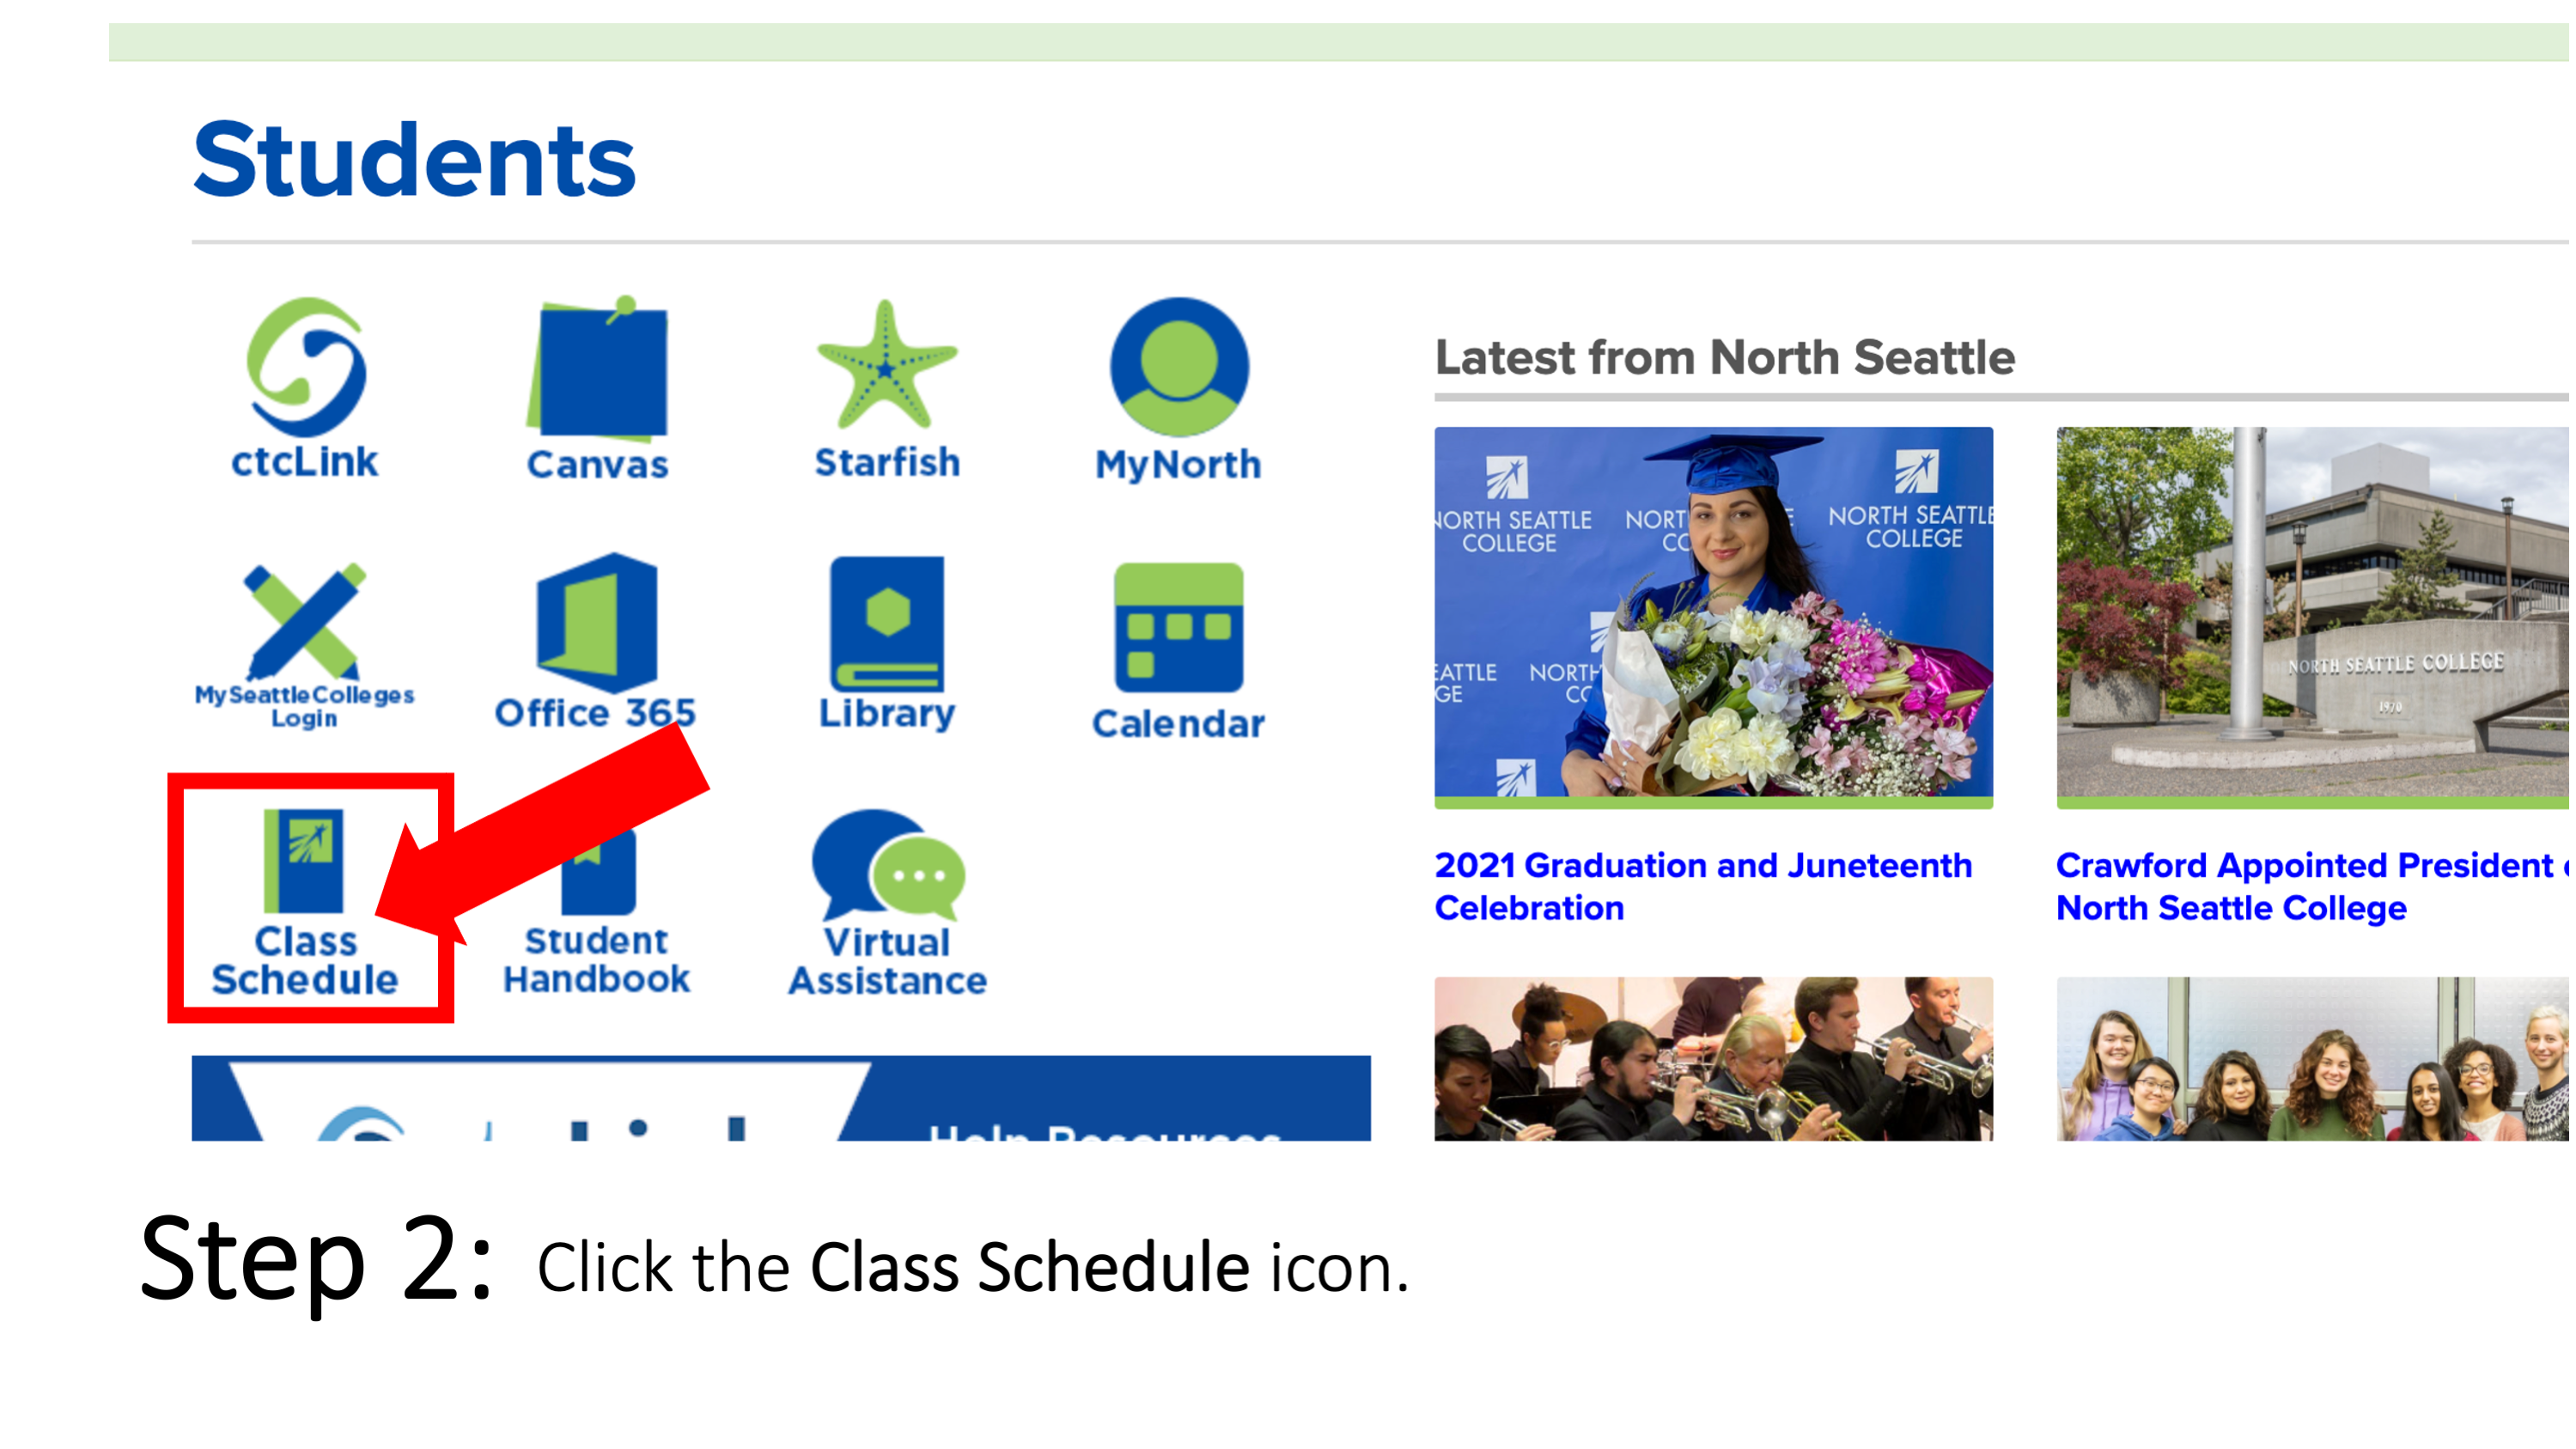 Step 2: Click on the Class Schedule icon.